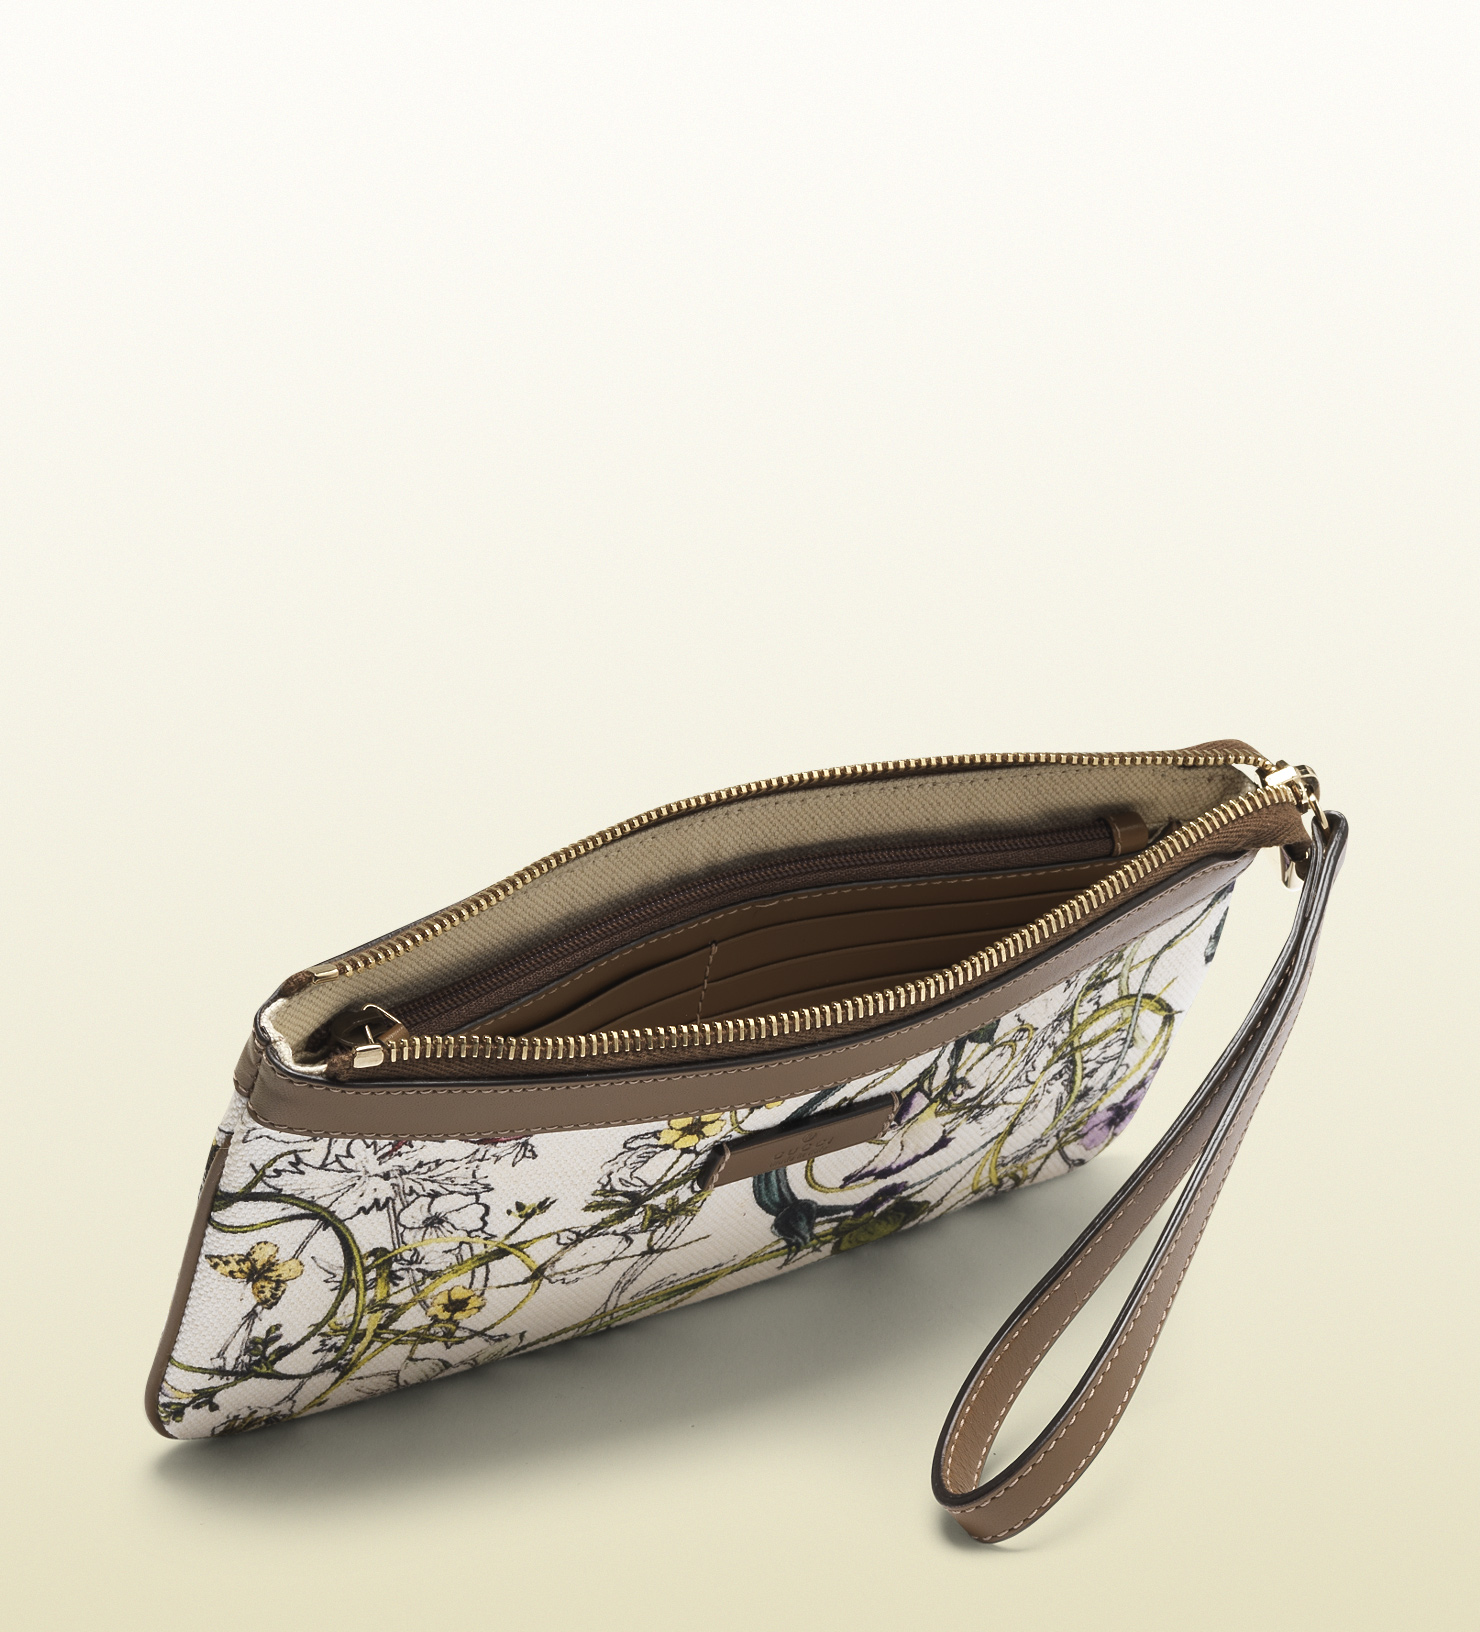 Lyst - Gucci Infinity Flora Print Canvas Wristlet in Brown